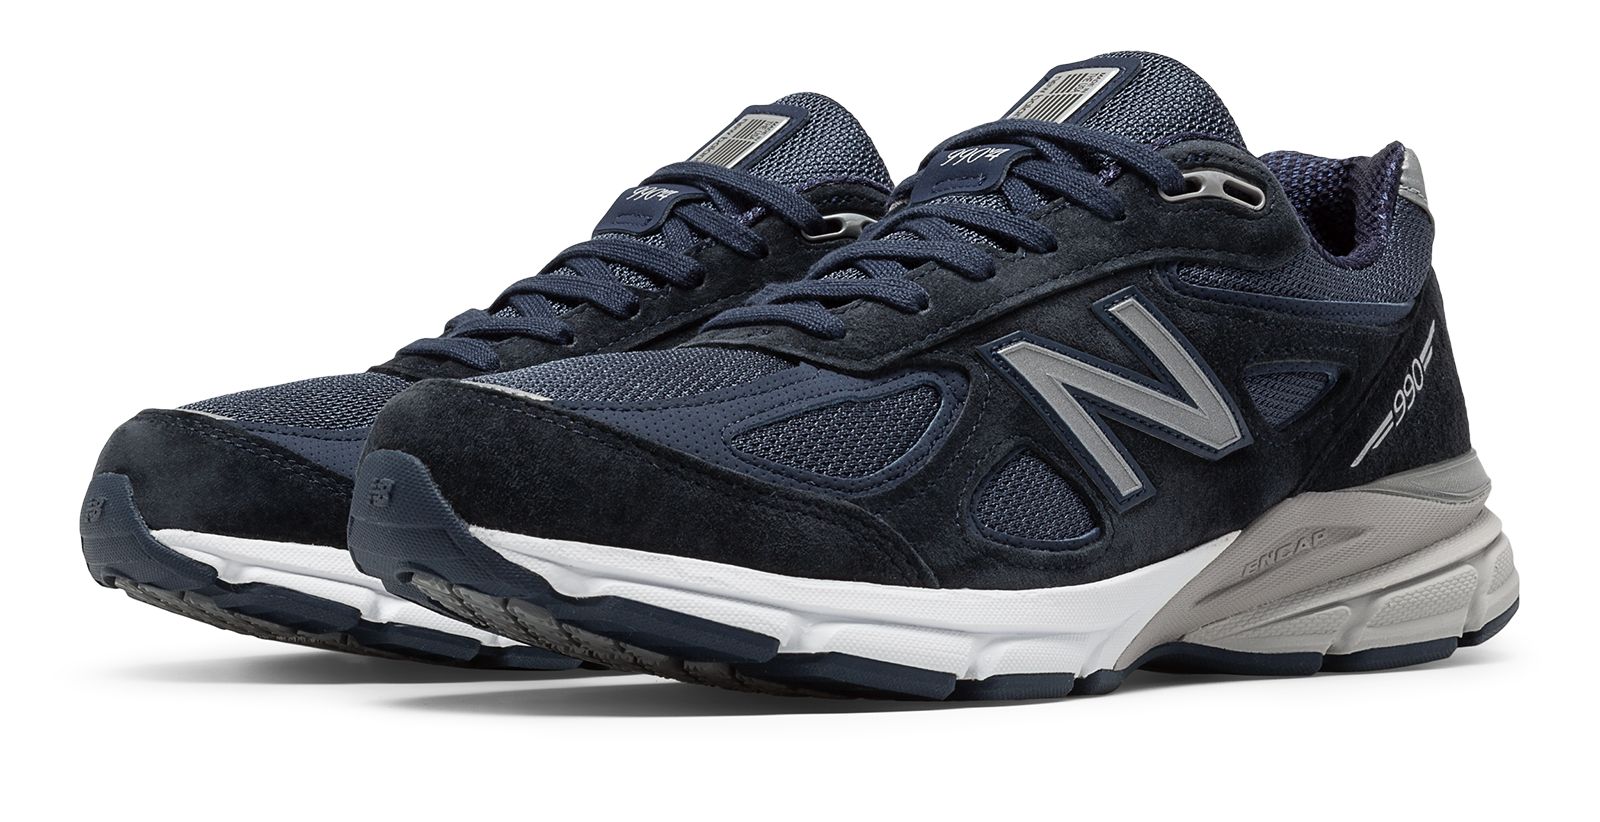 Factory Second New Balance Men's Made in US 990v4 Shoes Navy | eBay